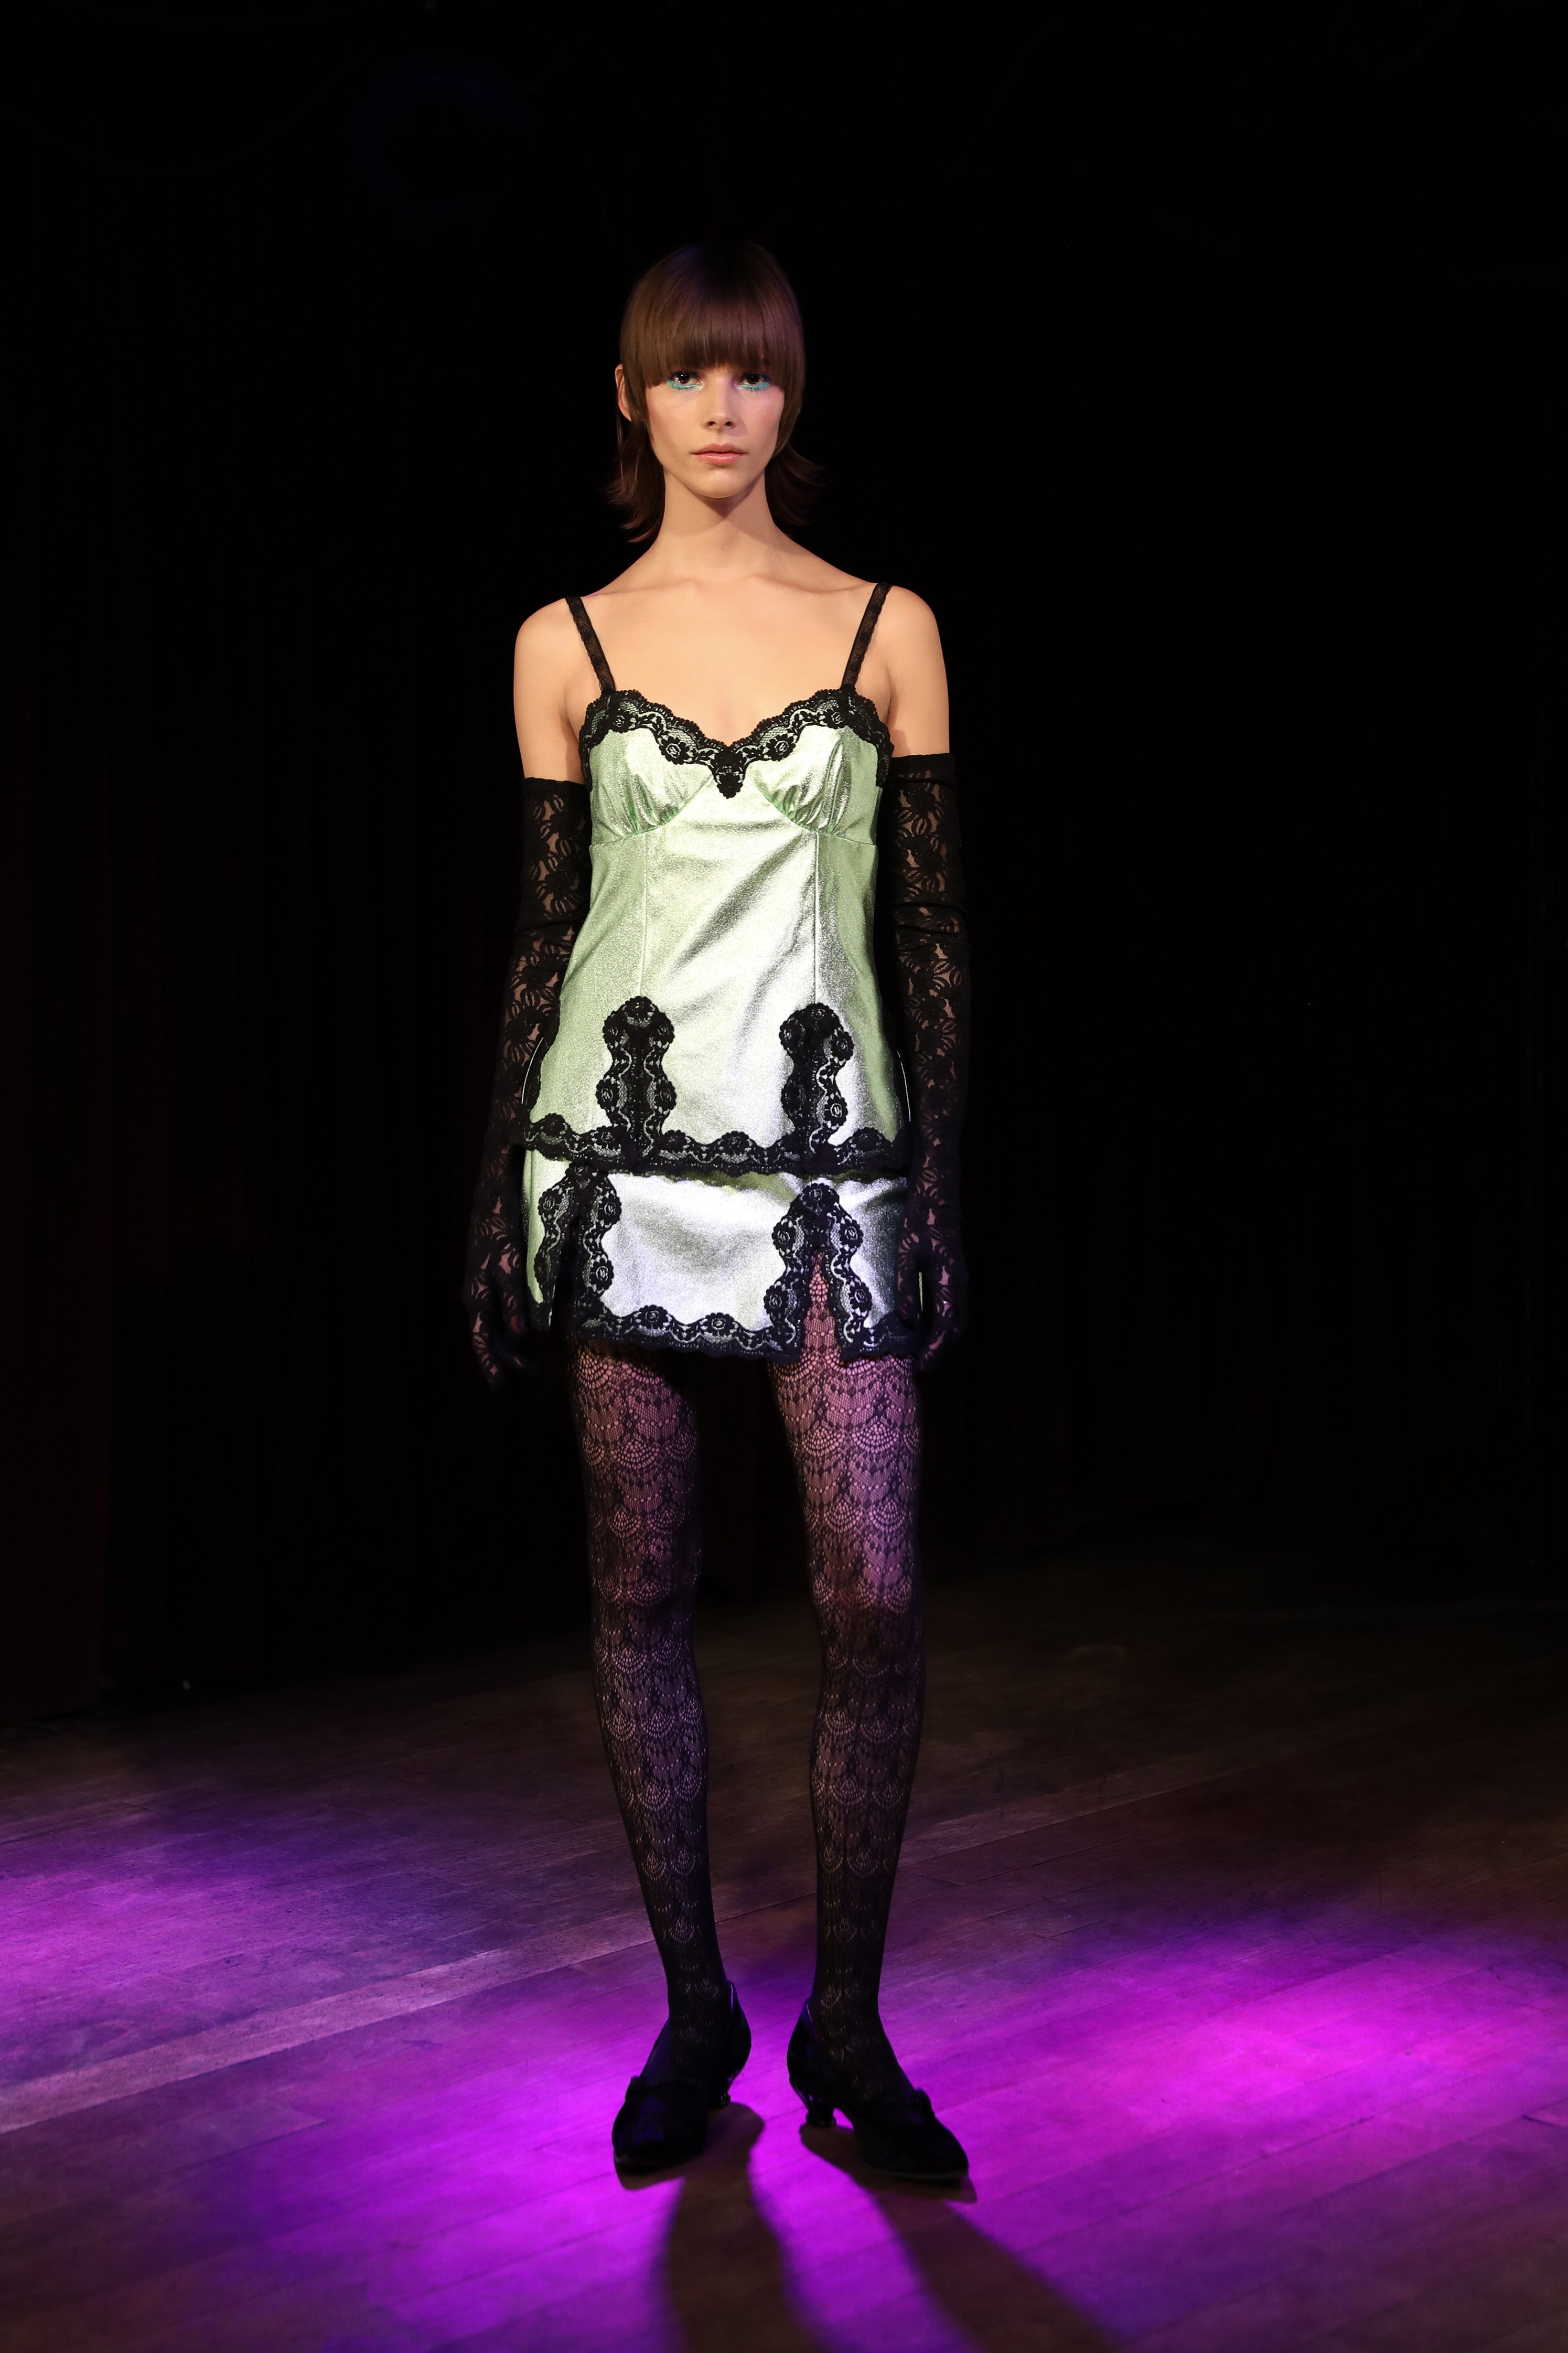 In dimly lit runway for this fashion Anna Sui's Metallic Faux Leather Mini Skirt Peppermint, with black lace top and bottom